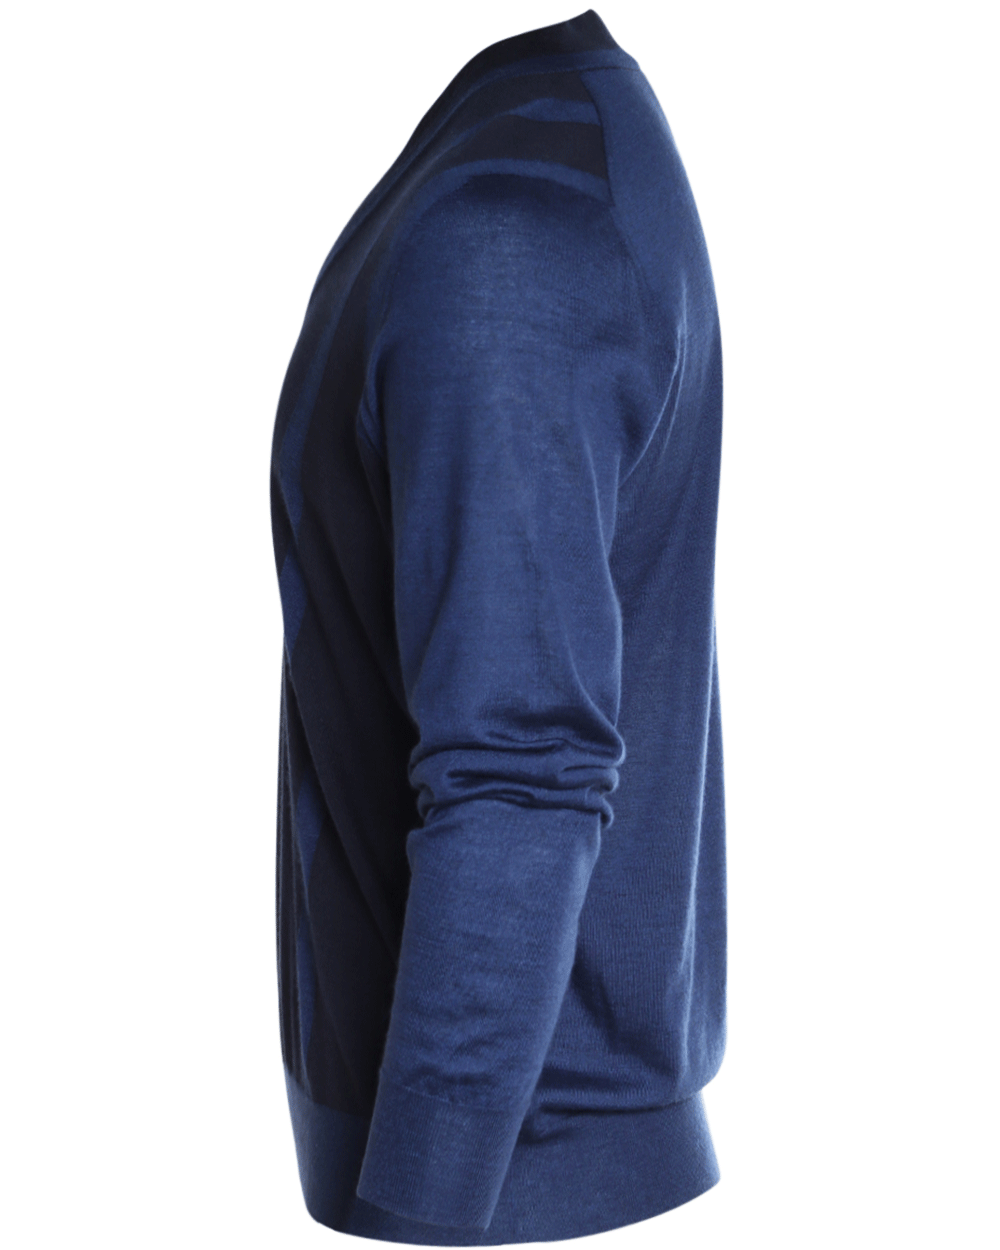 Navy and Blue V-Neck Sweater